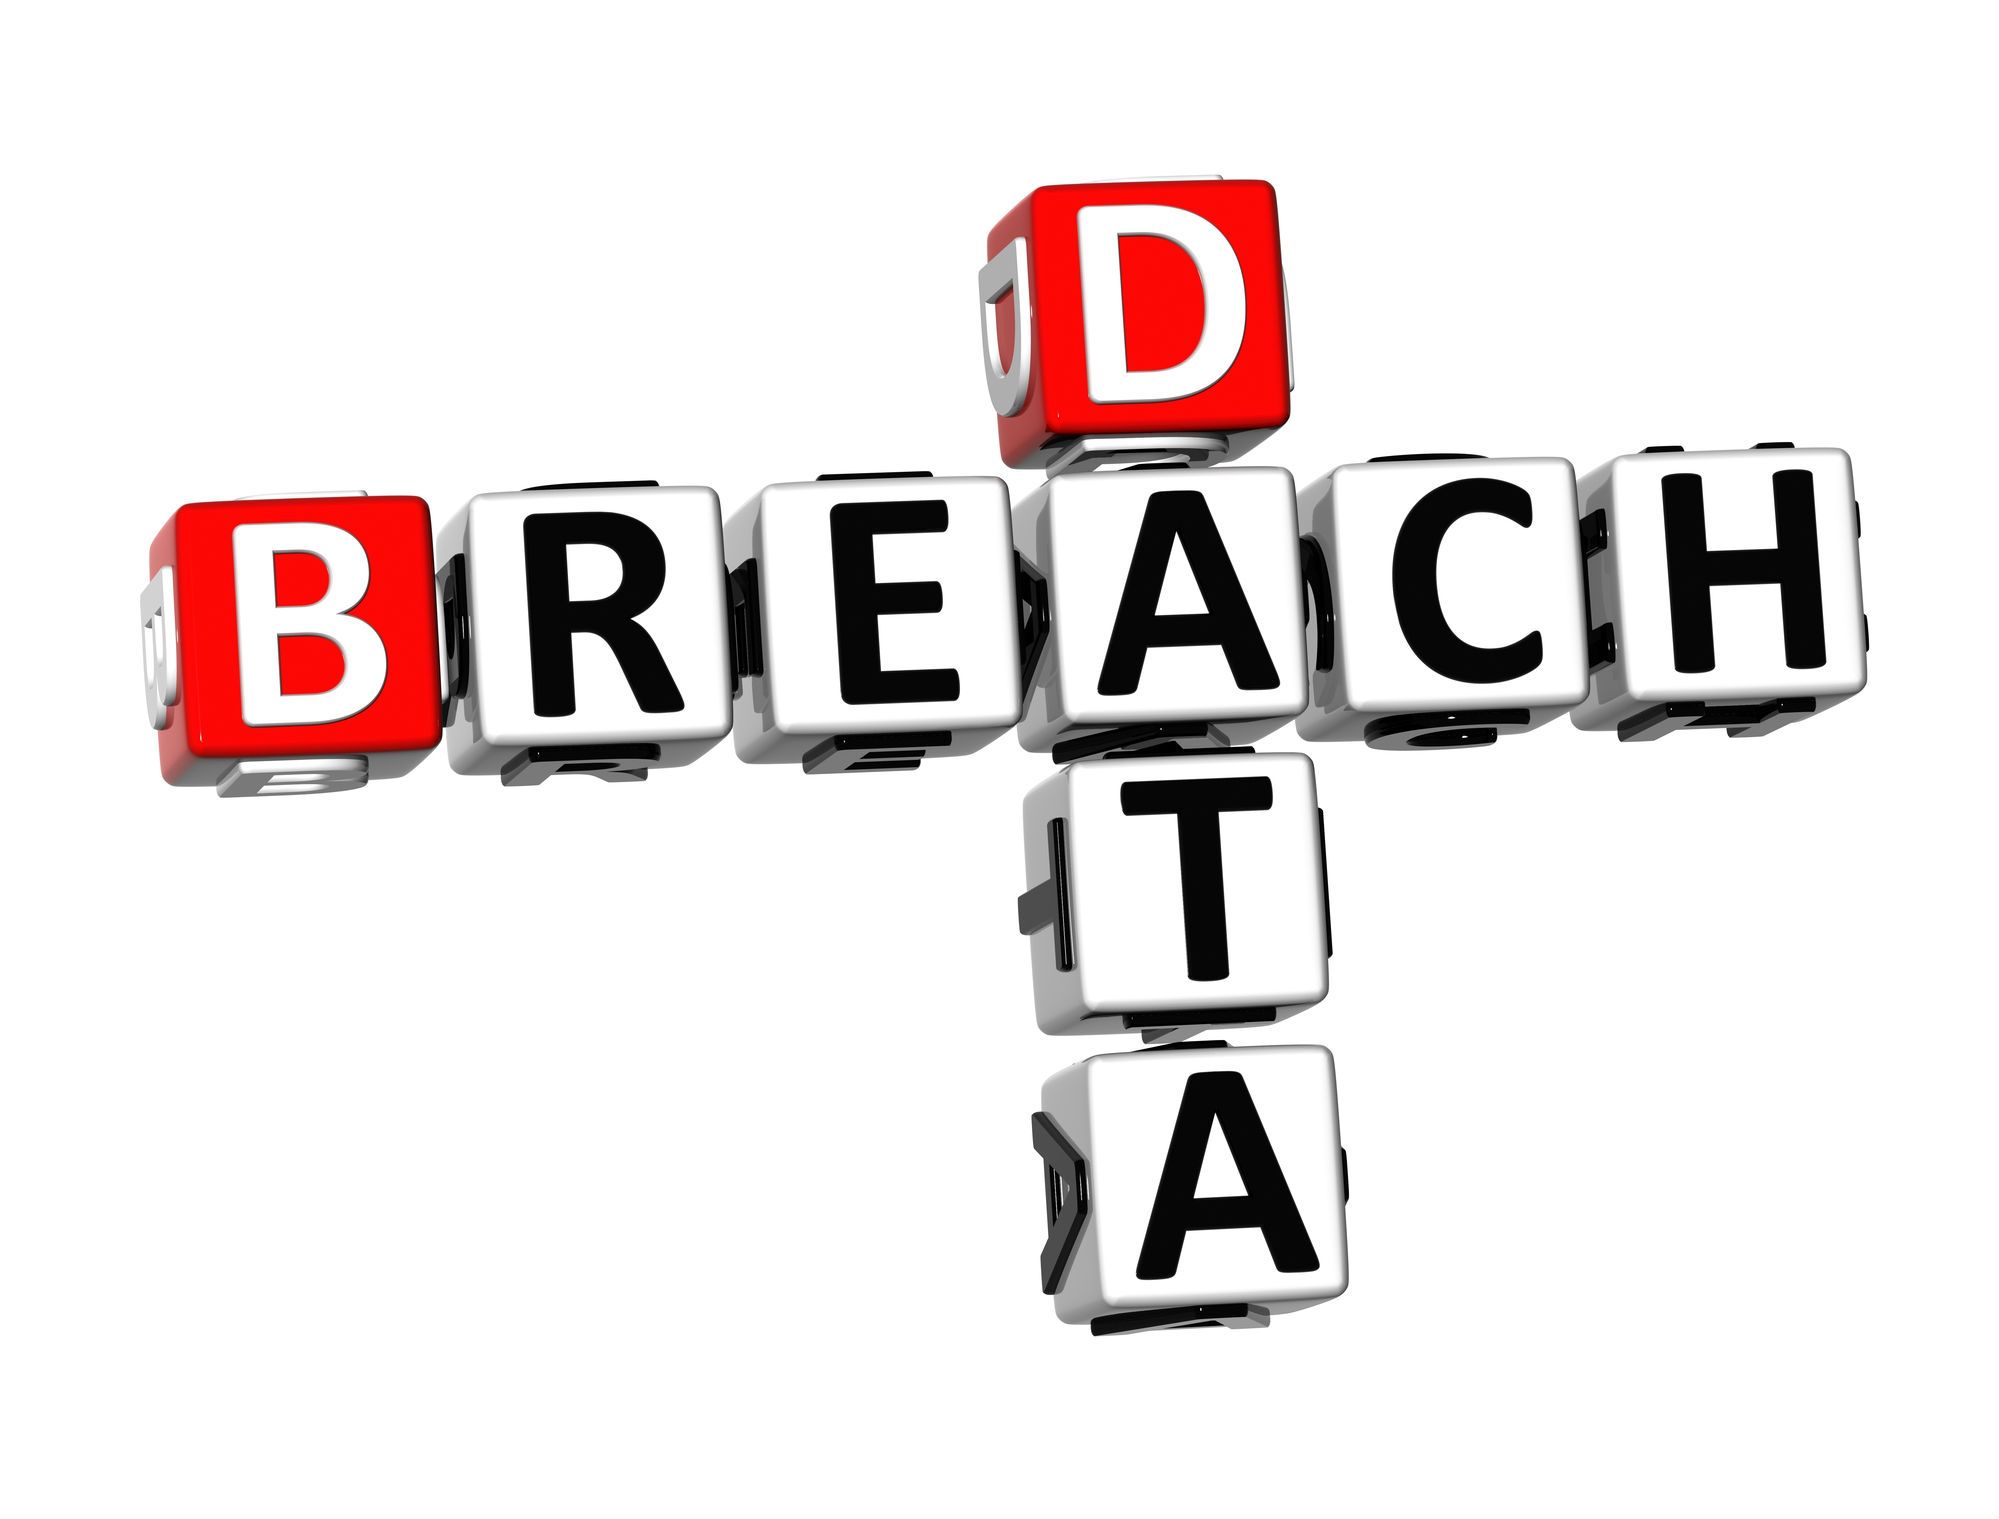 InterMed Data Breach Exposes 30K Patient Records Top Class Actions